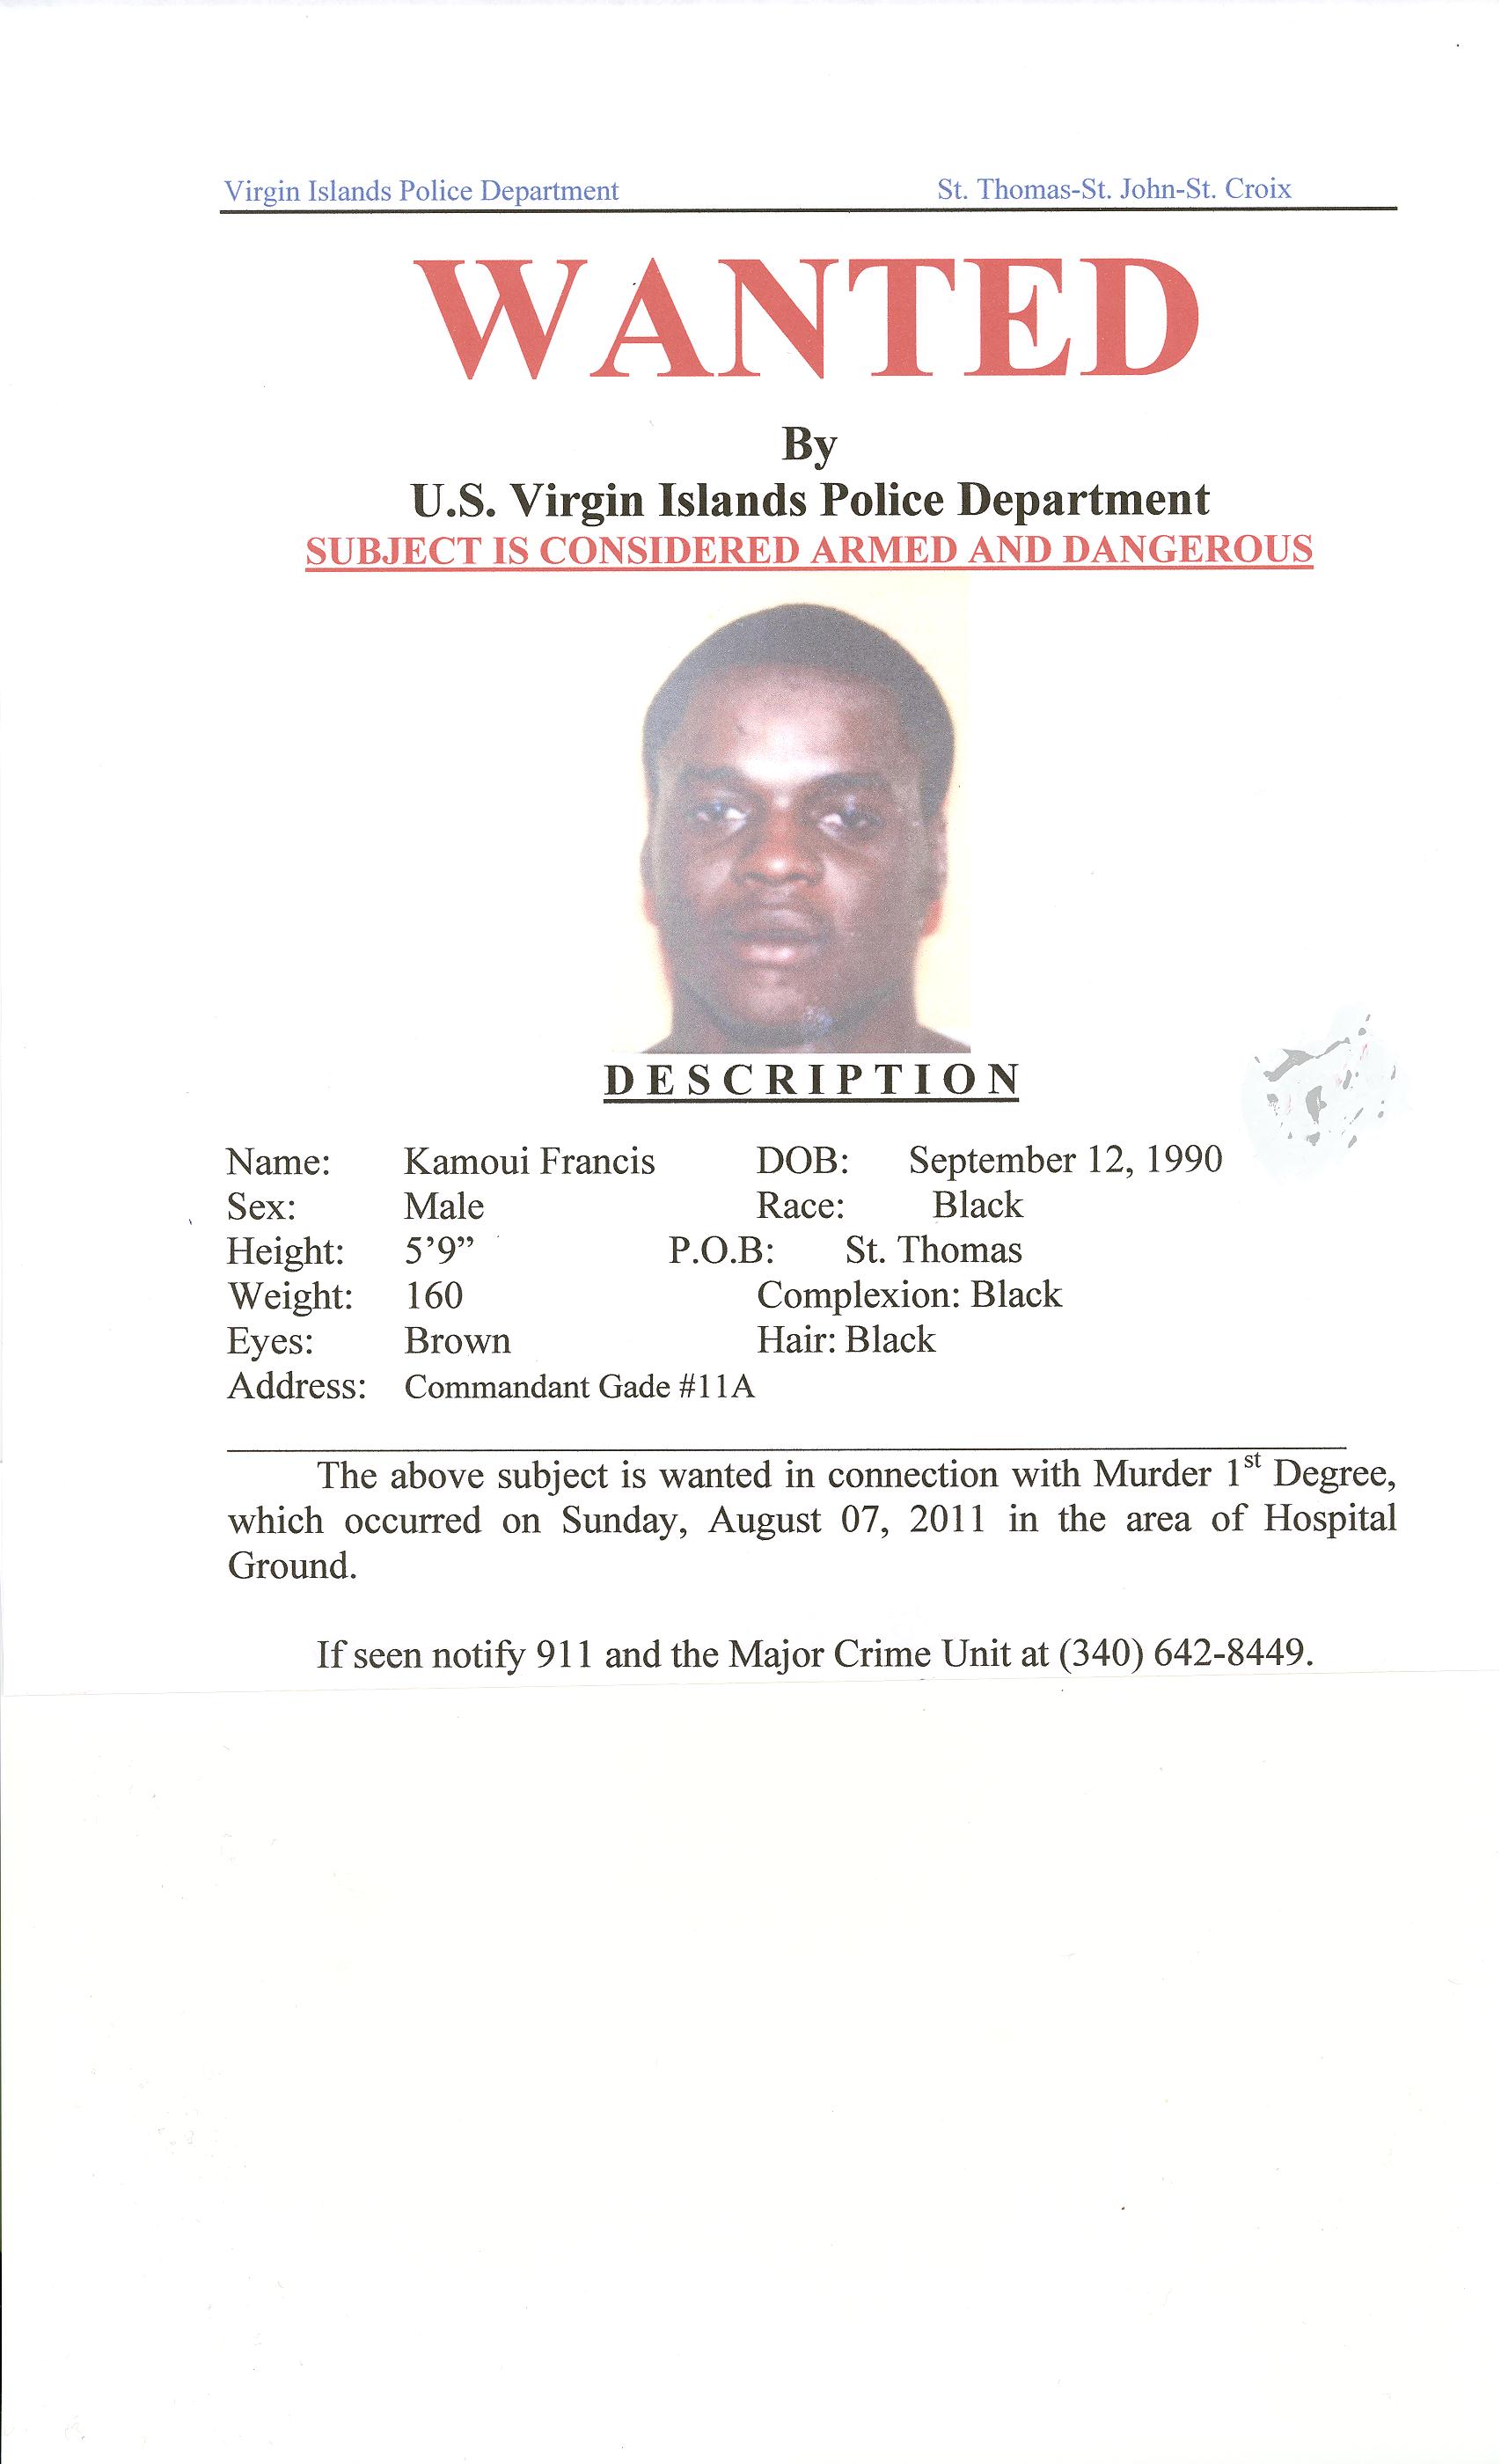 Kamoui Francis (pictured) and Issac Austrie are considered armed and dangerous (Photo VIPD).